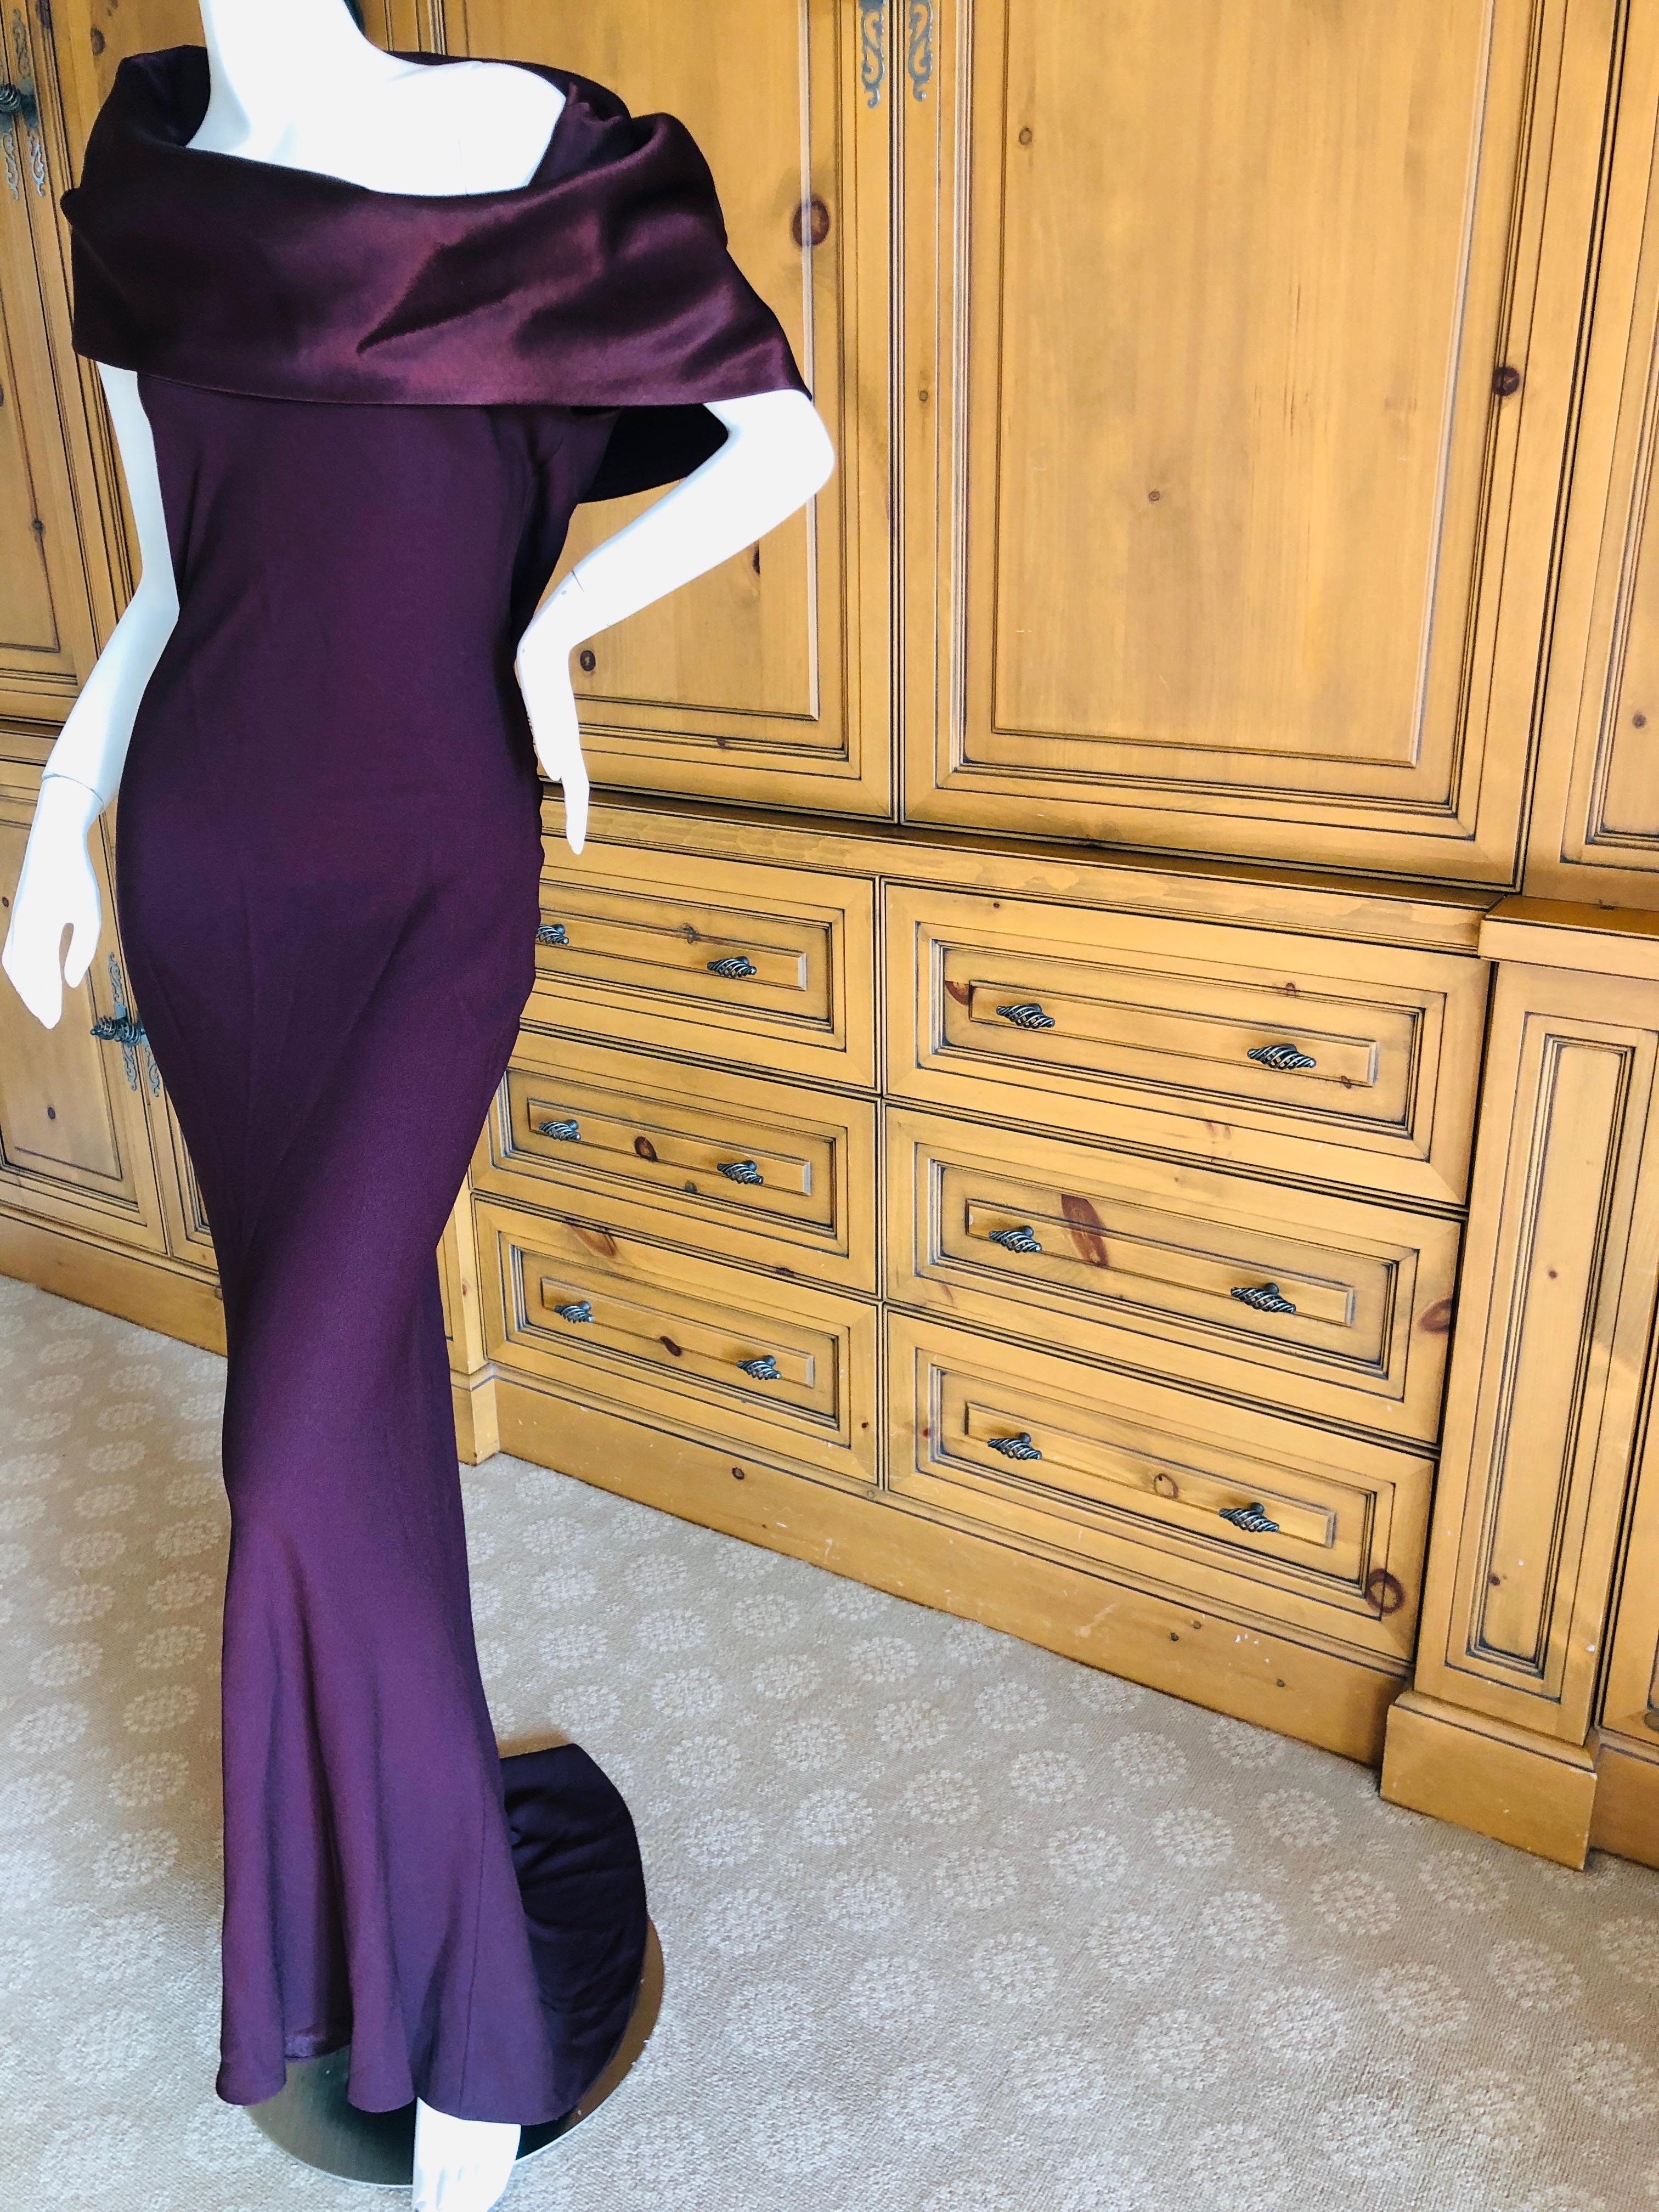  John Galliano 1990's Aubergine Cowl Collar Bias Cut Evening Dress Size 44 In Excellent Condition For Sale In Cloverdale, CA